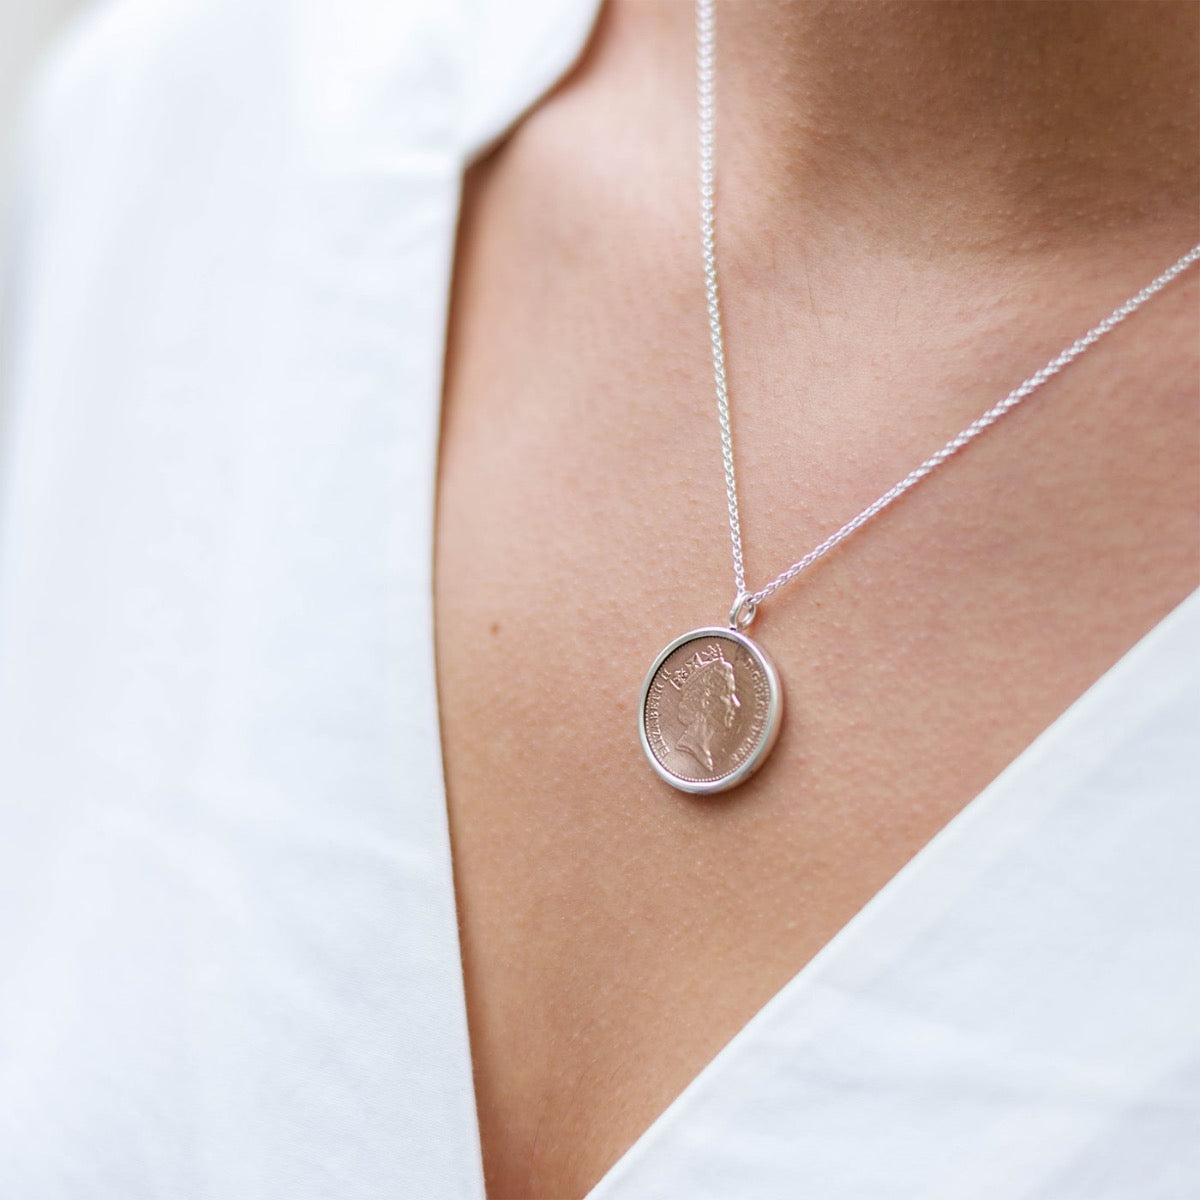 Silver lucky penny necklace